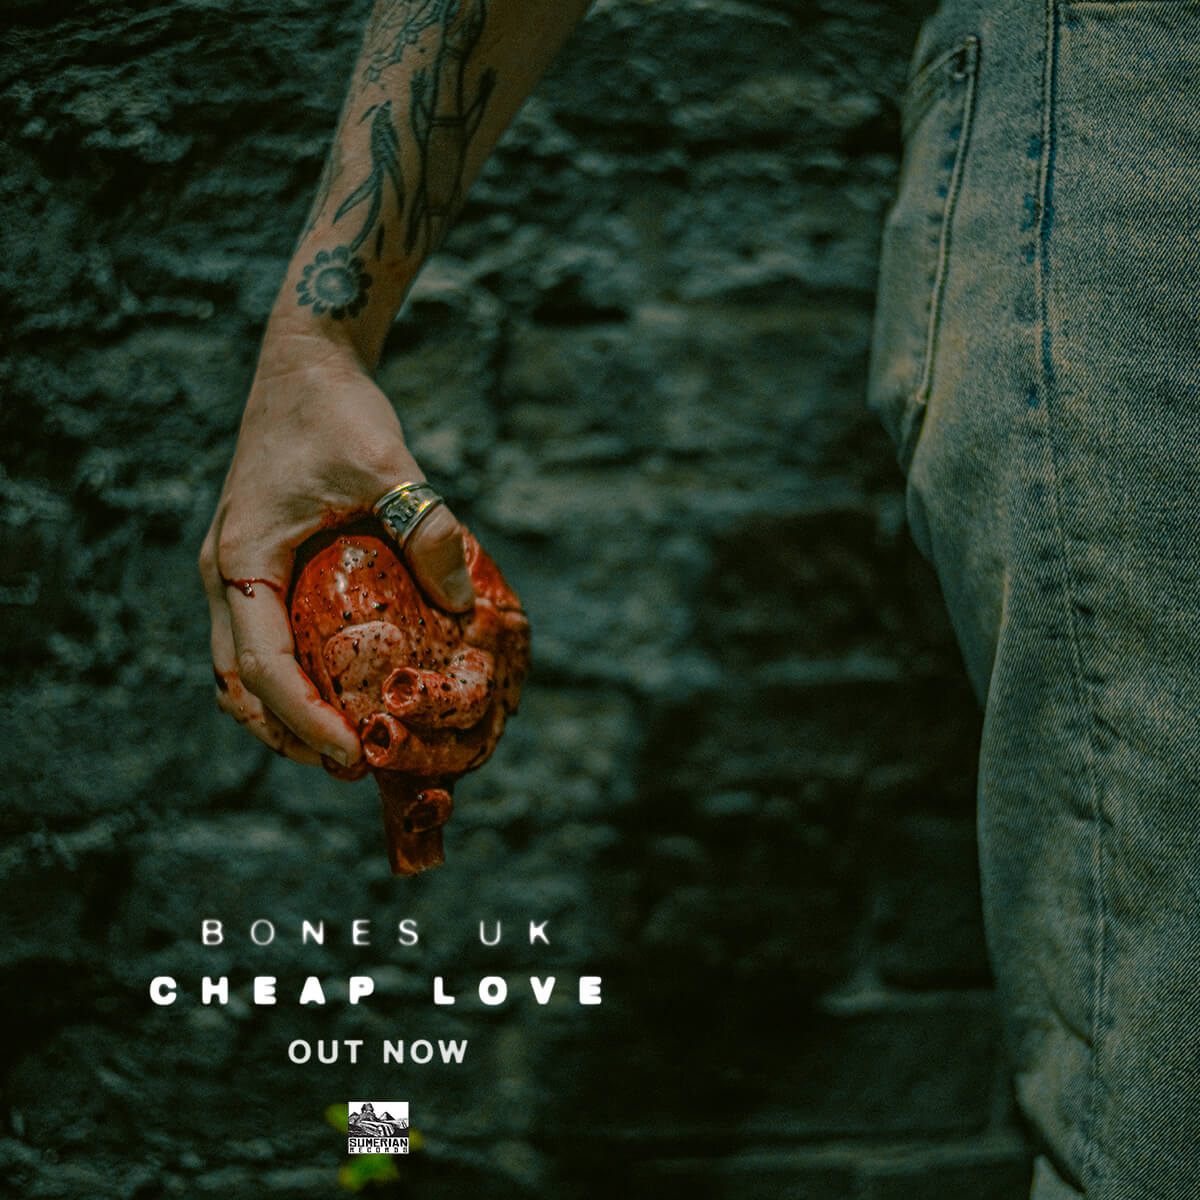 BONES UK NEW SINGLE 'CHEAP LOVE' OUT NOW